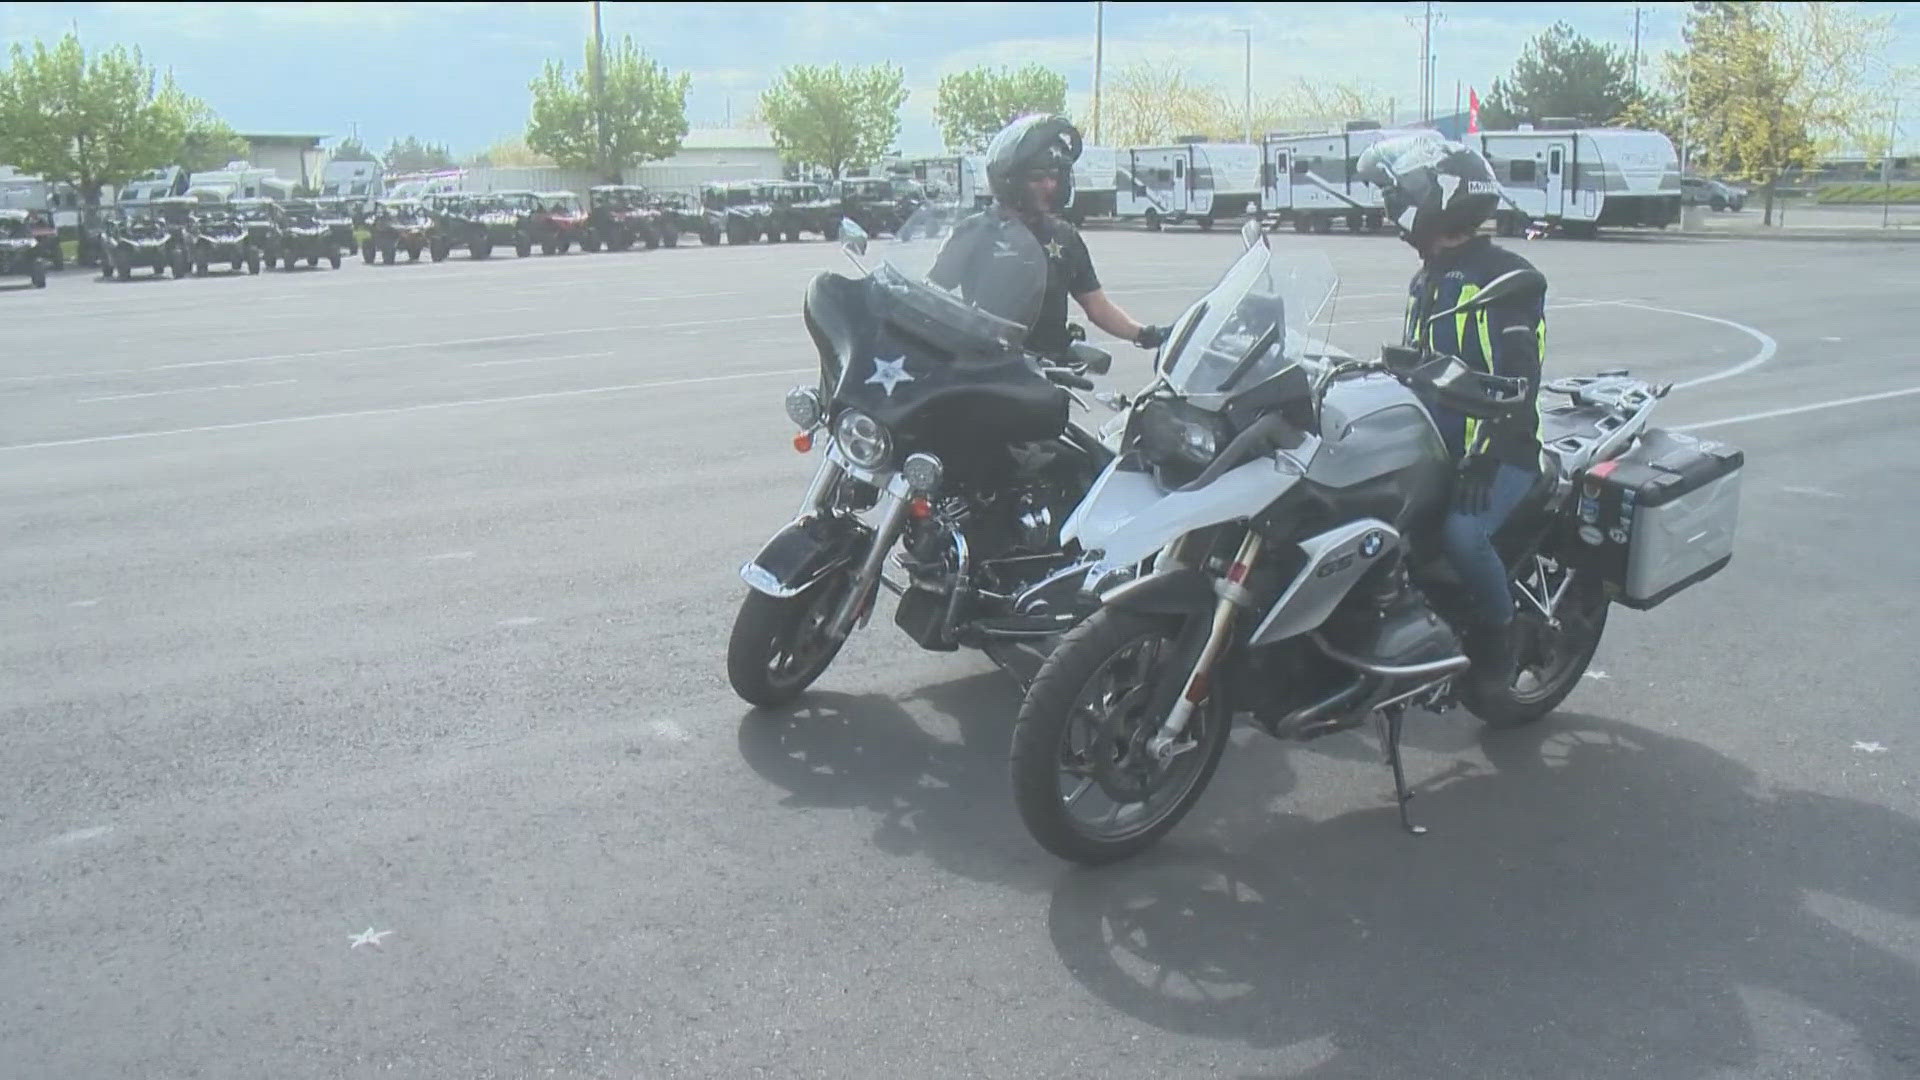 Several agencies gathered in Boise on Wednesday to promote motorcycle safety and spread awareness ahead of Saturday's escorted group ride.